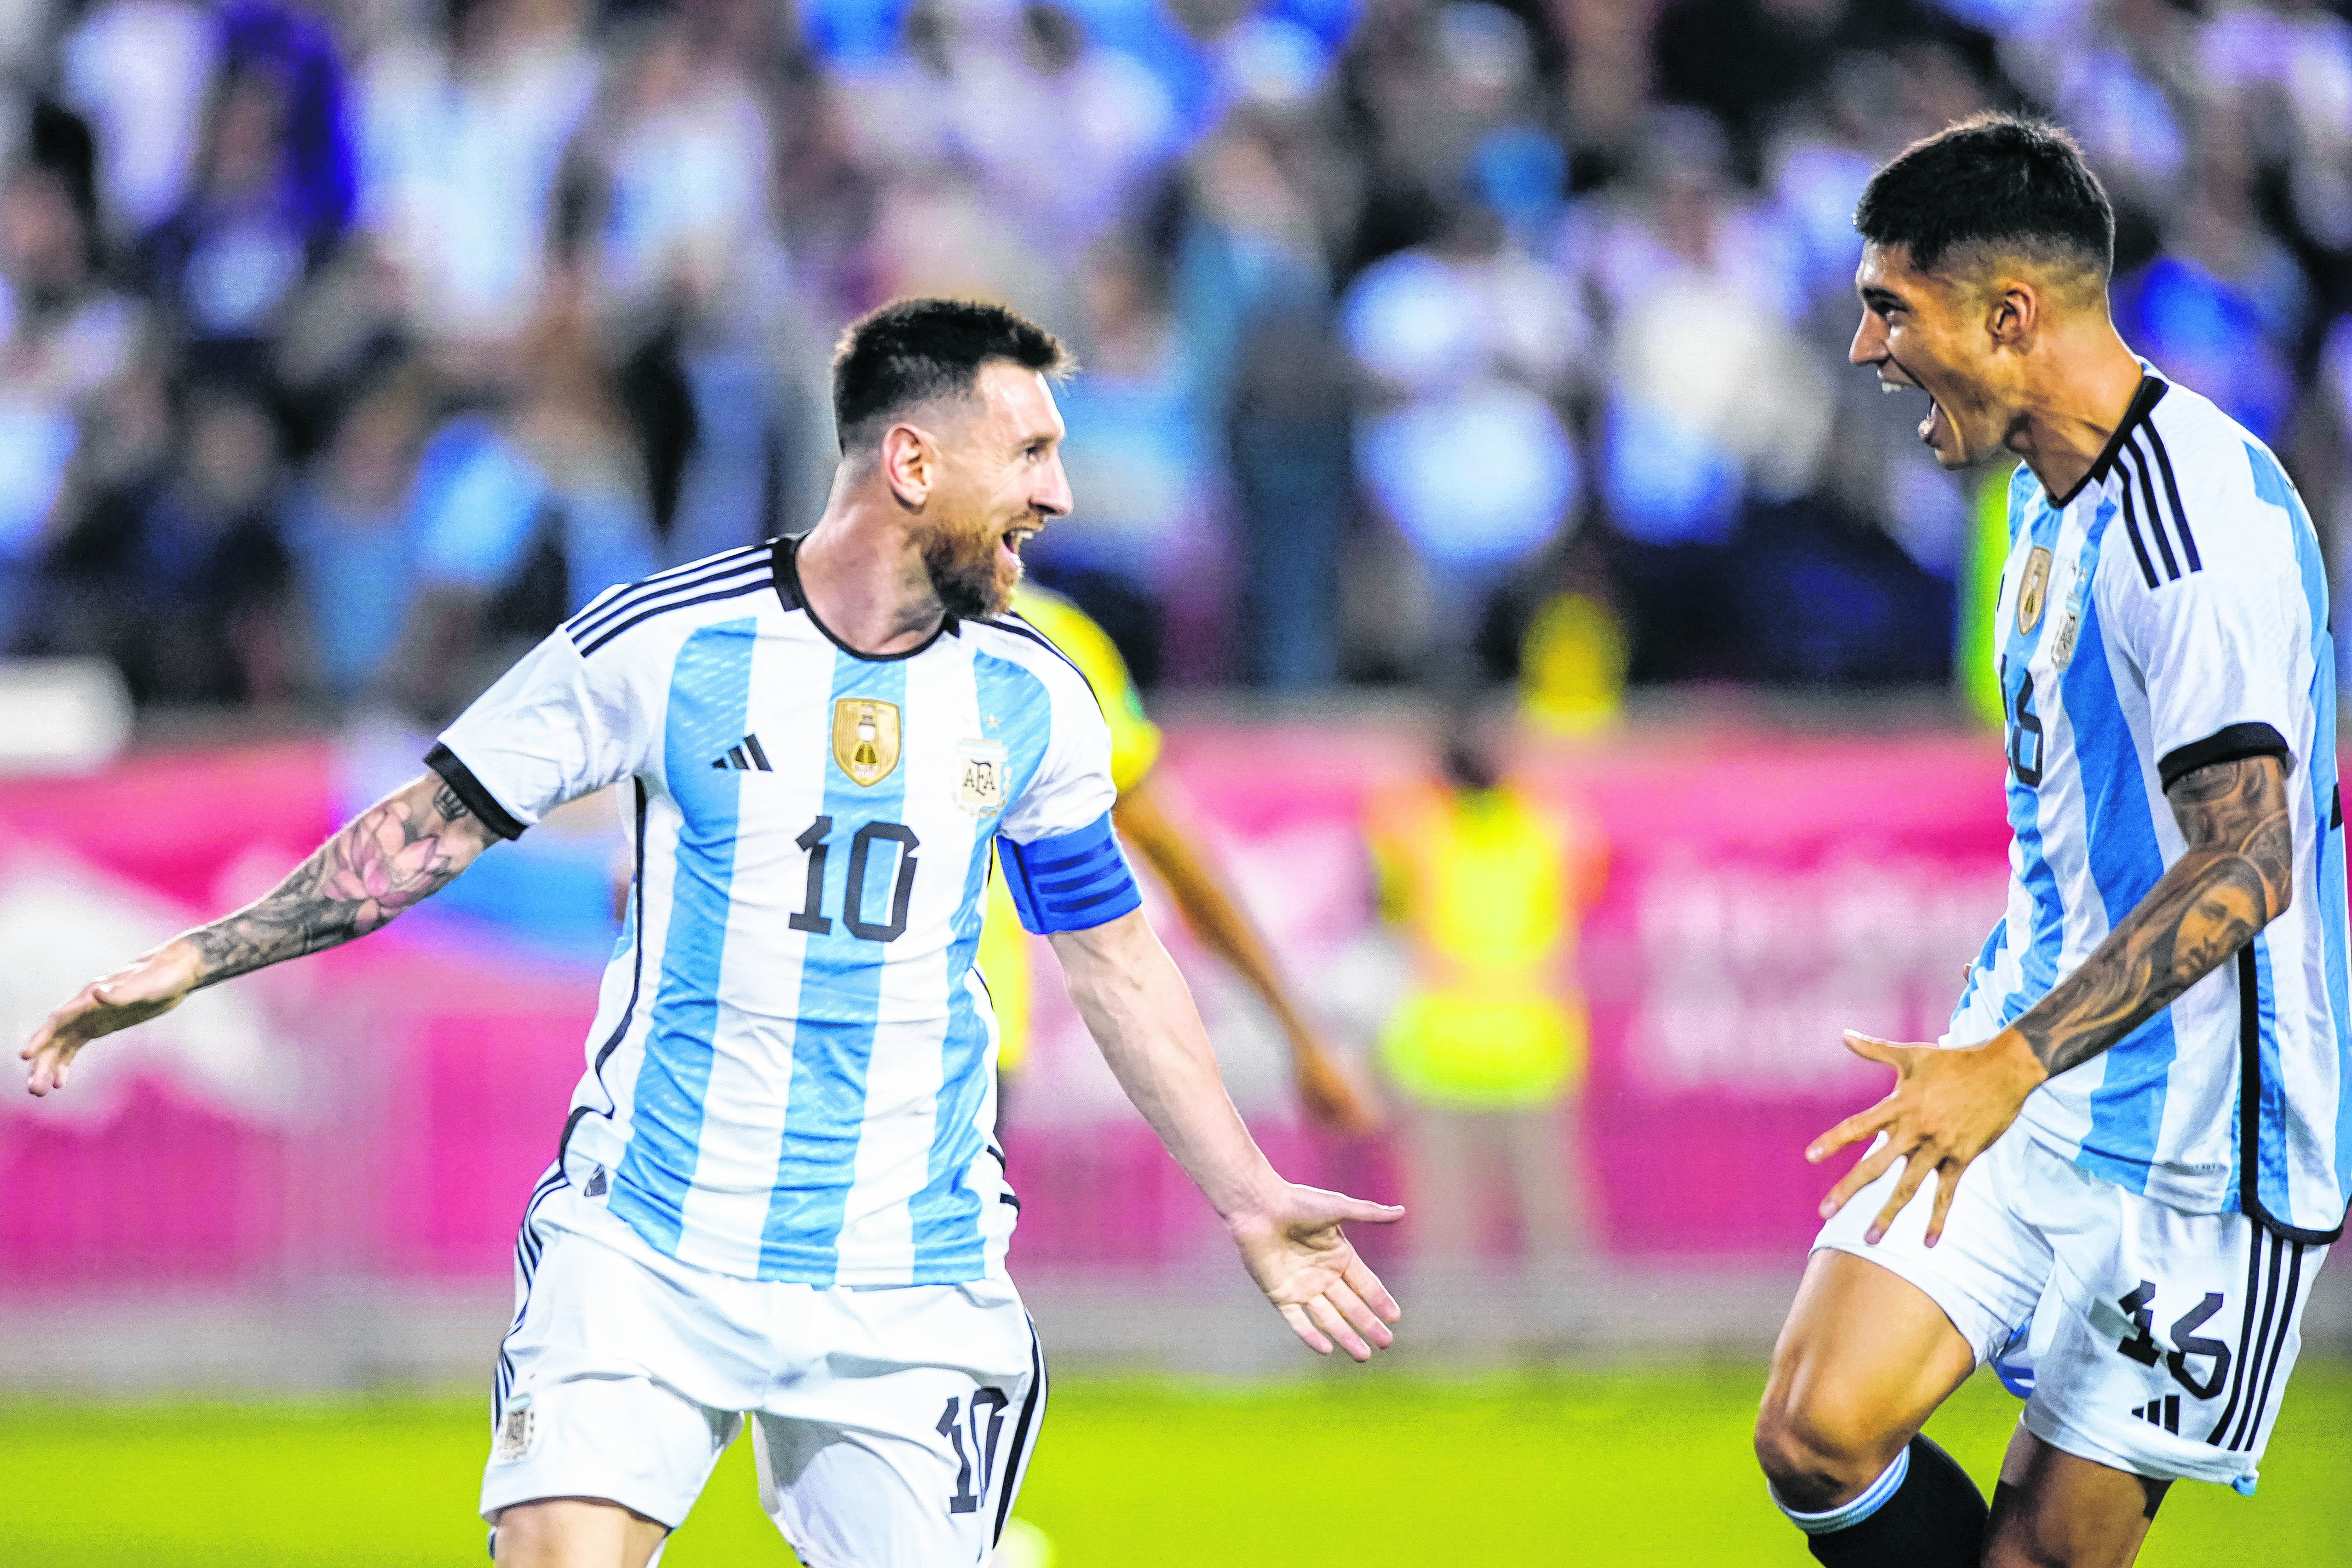 Argentina's player Lionel Messi celebrates his goal during the second half of an international friendly soccer match against Jamaica on Tuesday, Sept. 27, 2022, in Harrison, N.J. (AP Photo/Eduardo Munoz Alvarez)